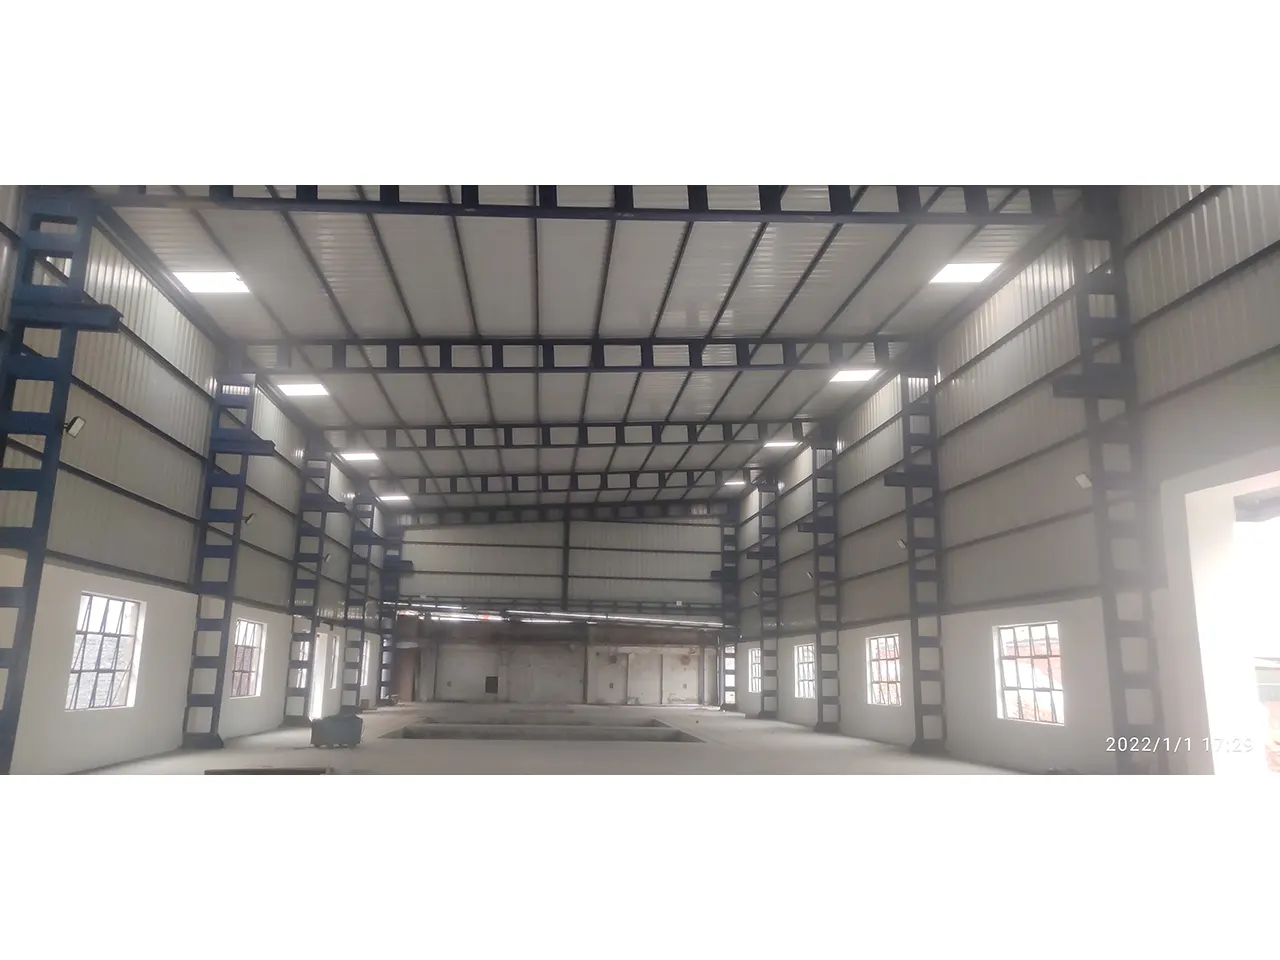 steel structure shed design